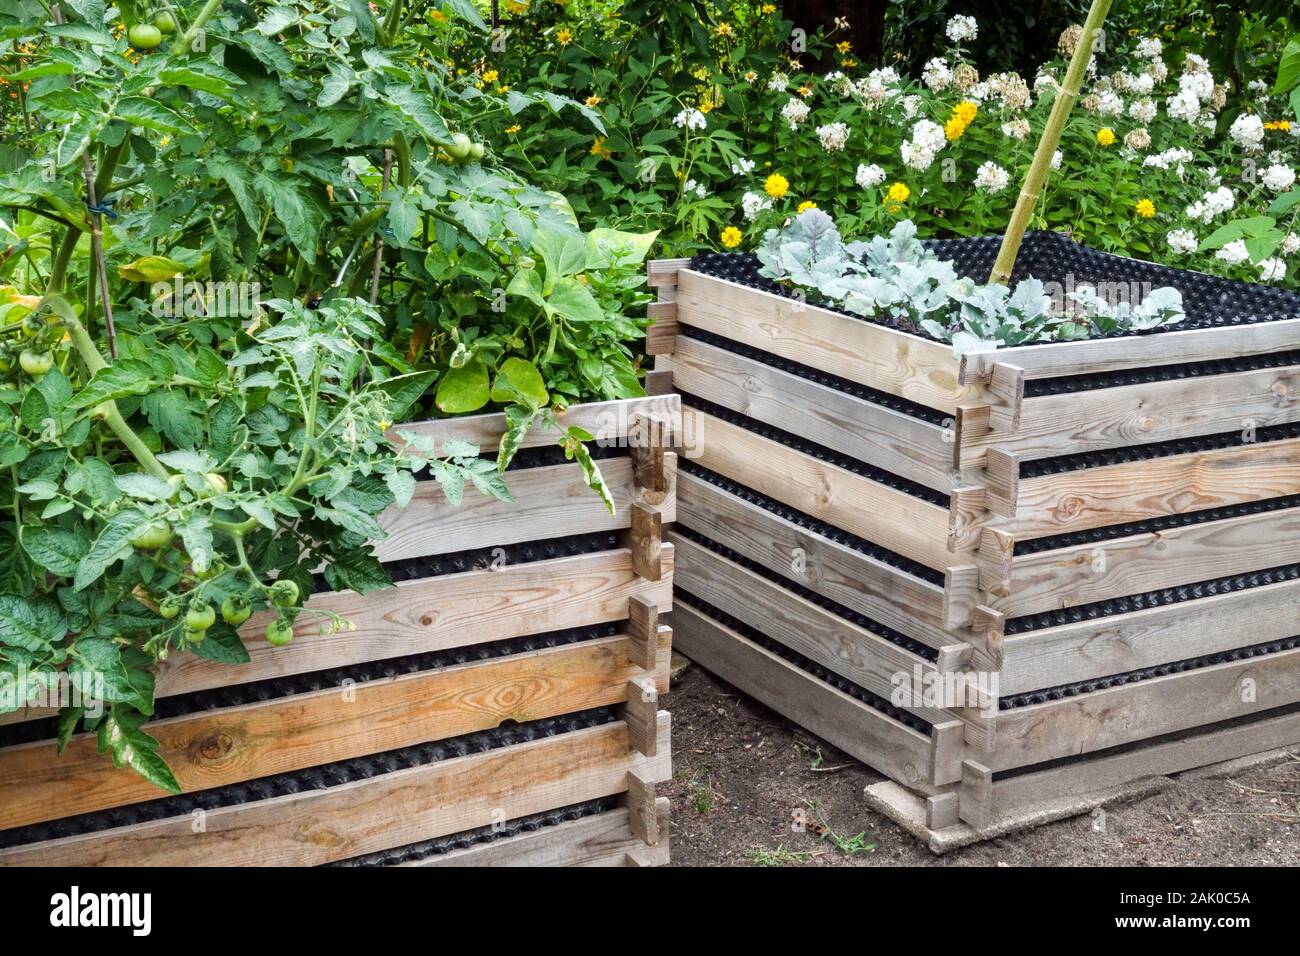 A wooden raised bed growing plants Stock Photo